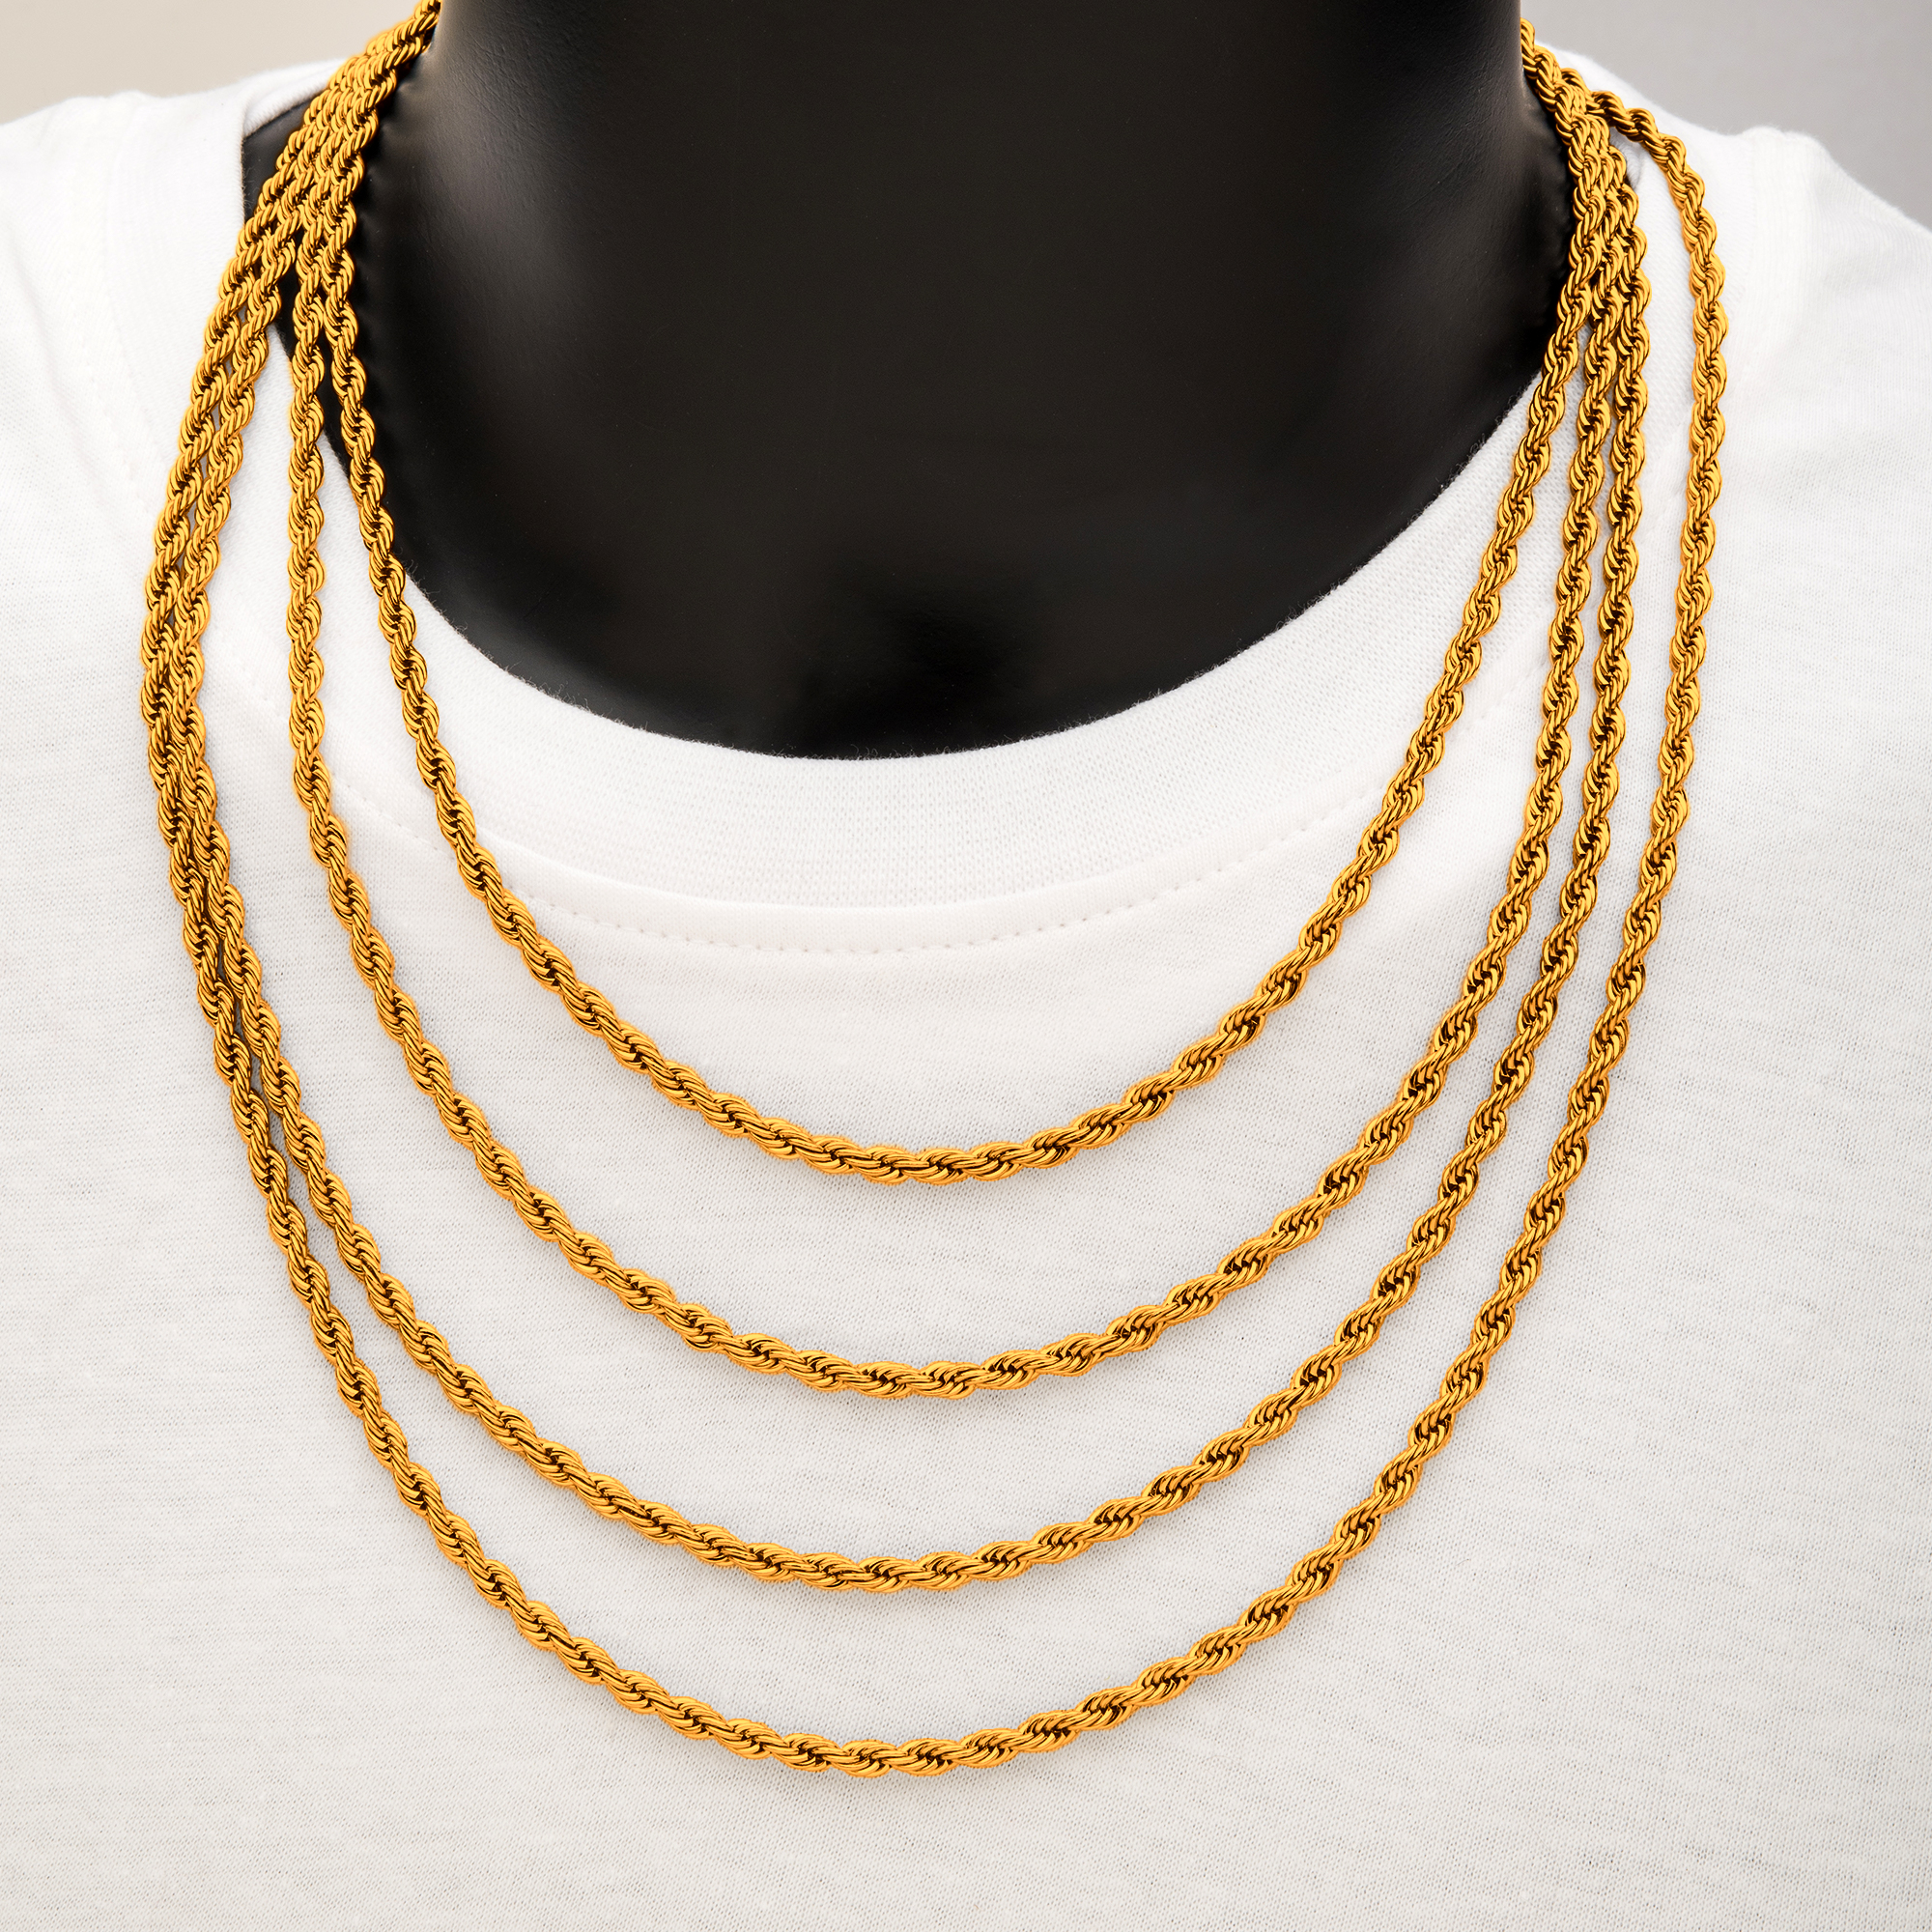 4mm 18K Gold Plated Rope Chain Image 2 P.K. Bennett Jewelers Mundelein, IL